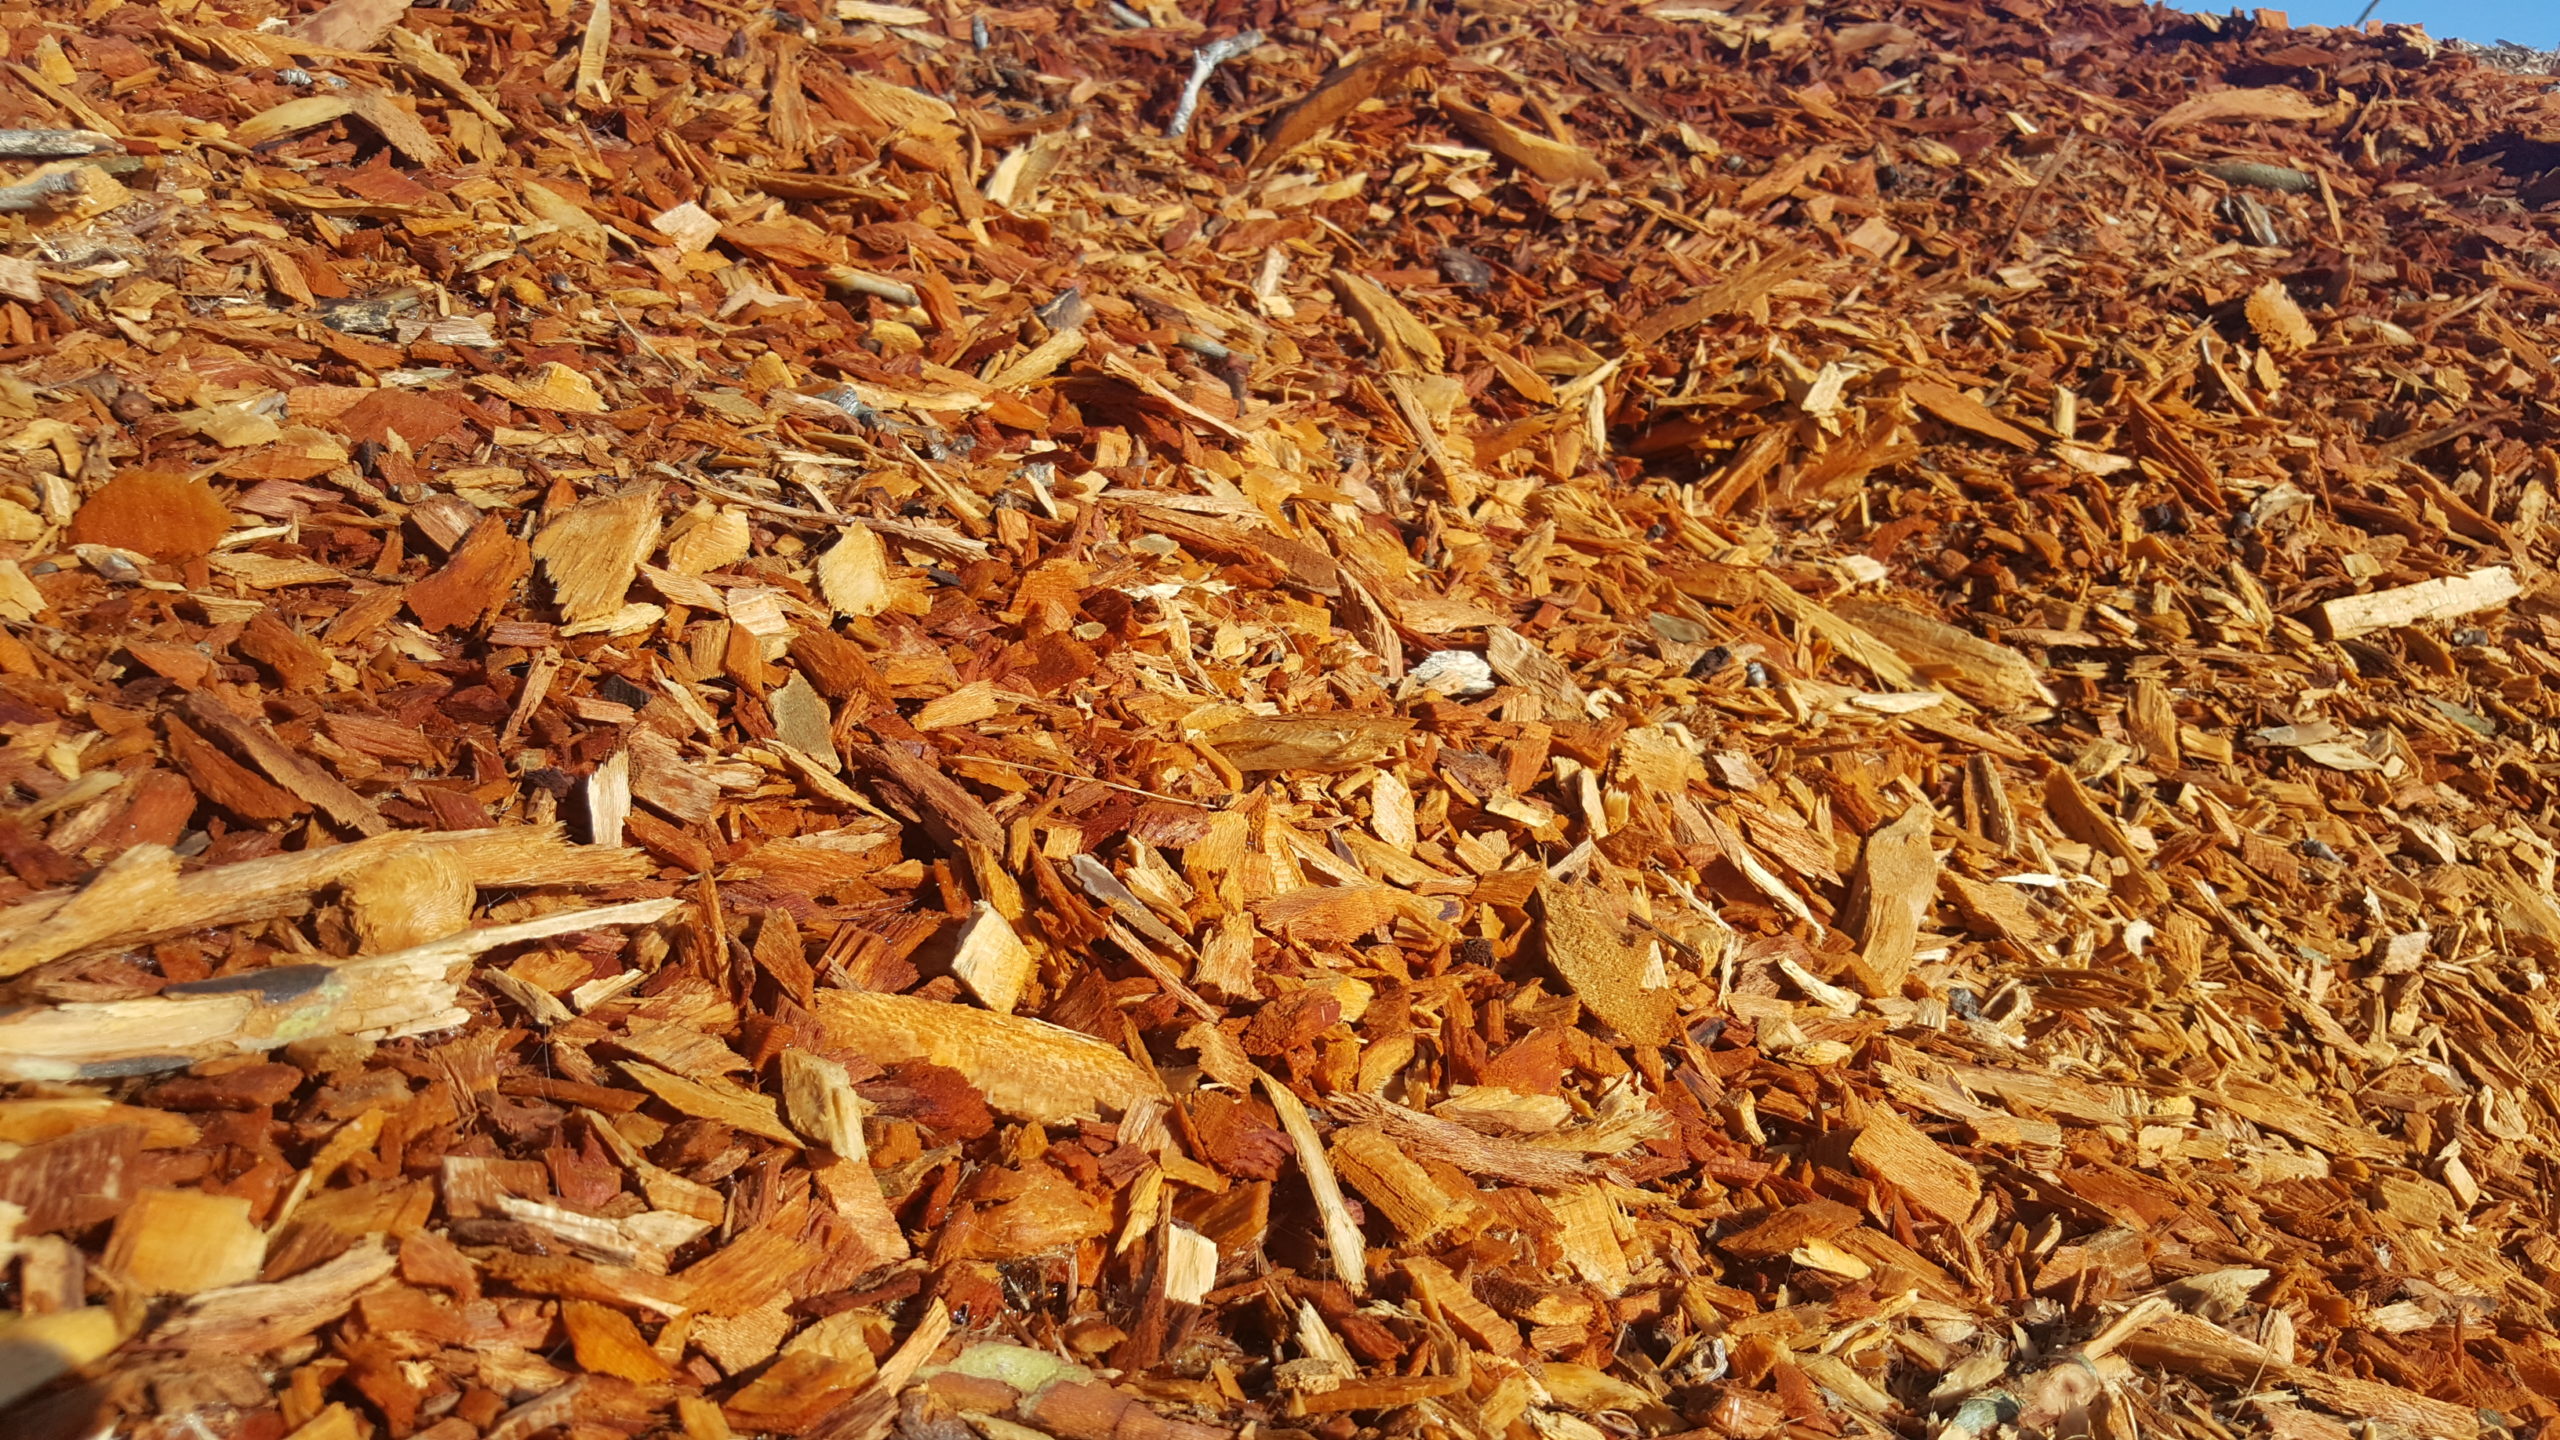 Woodchip from Apsley Farms